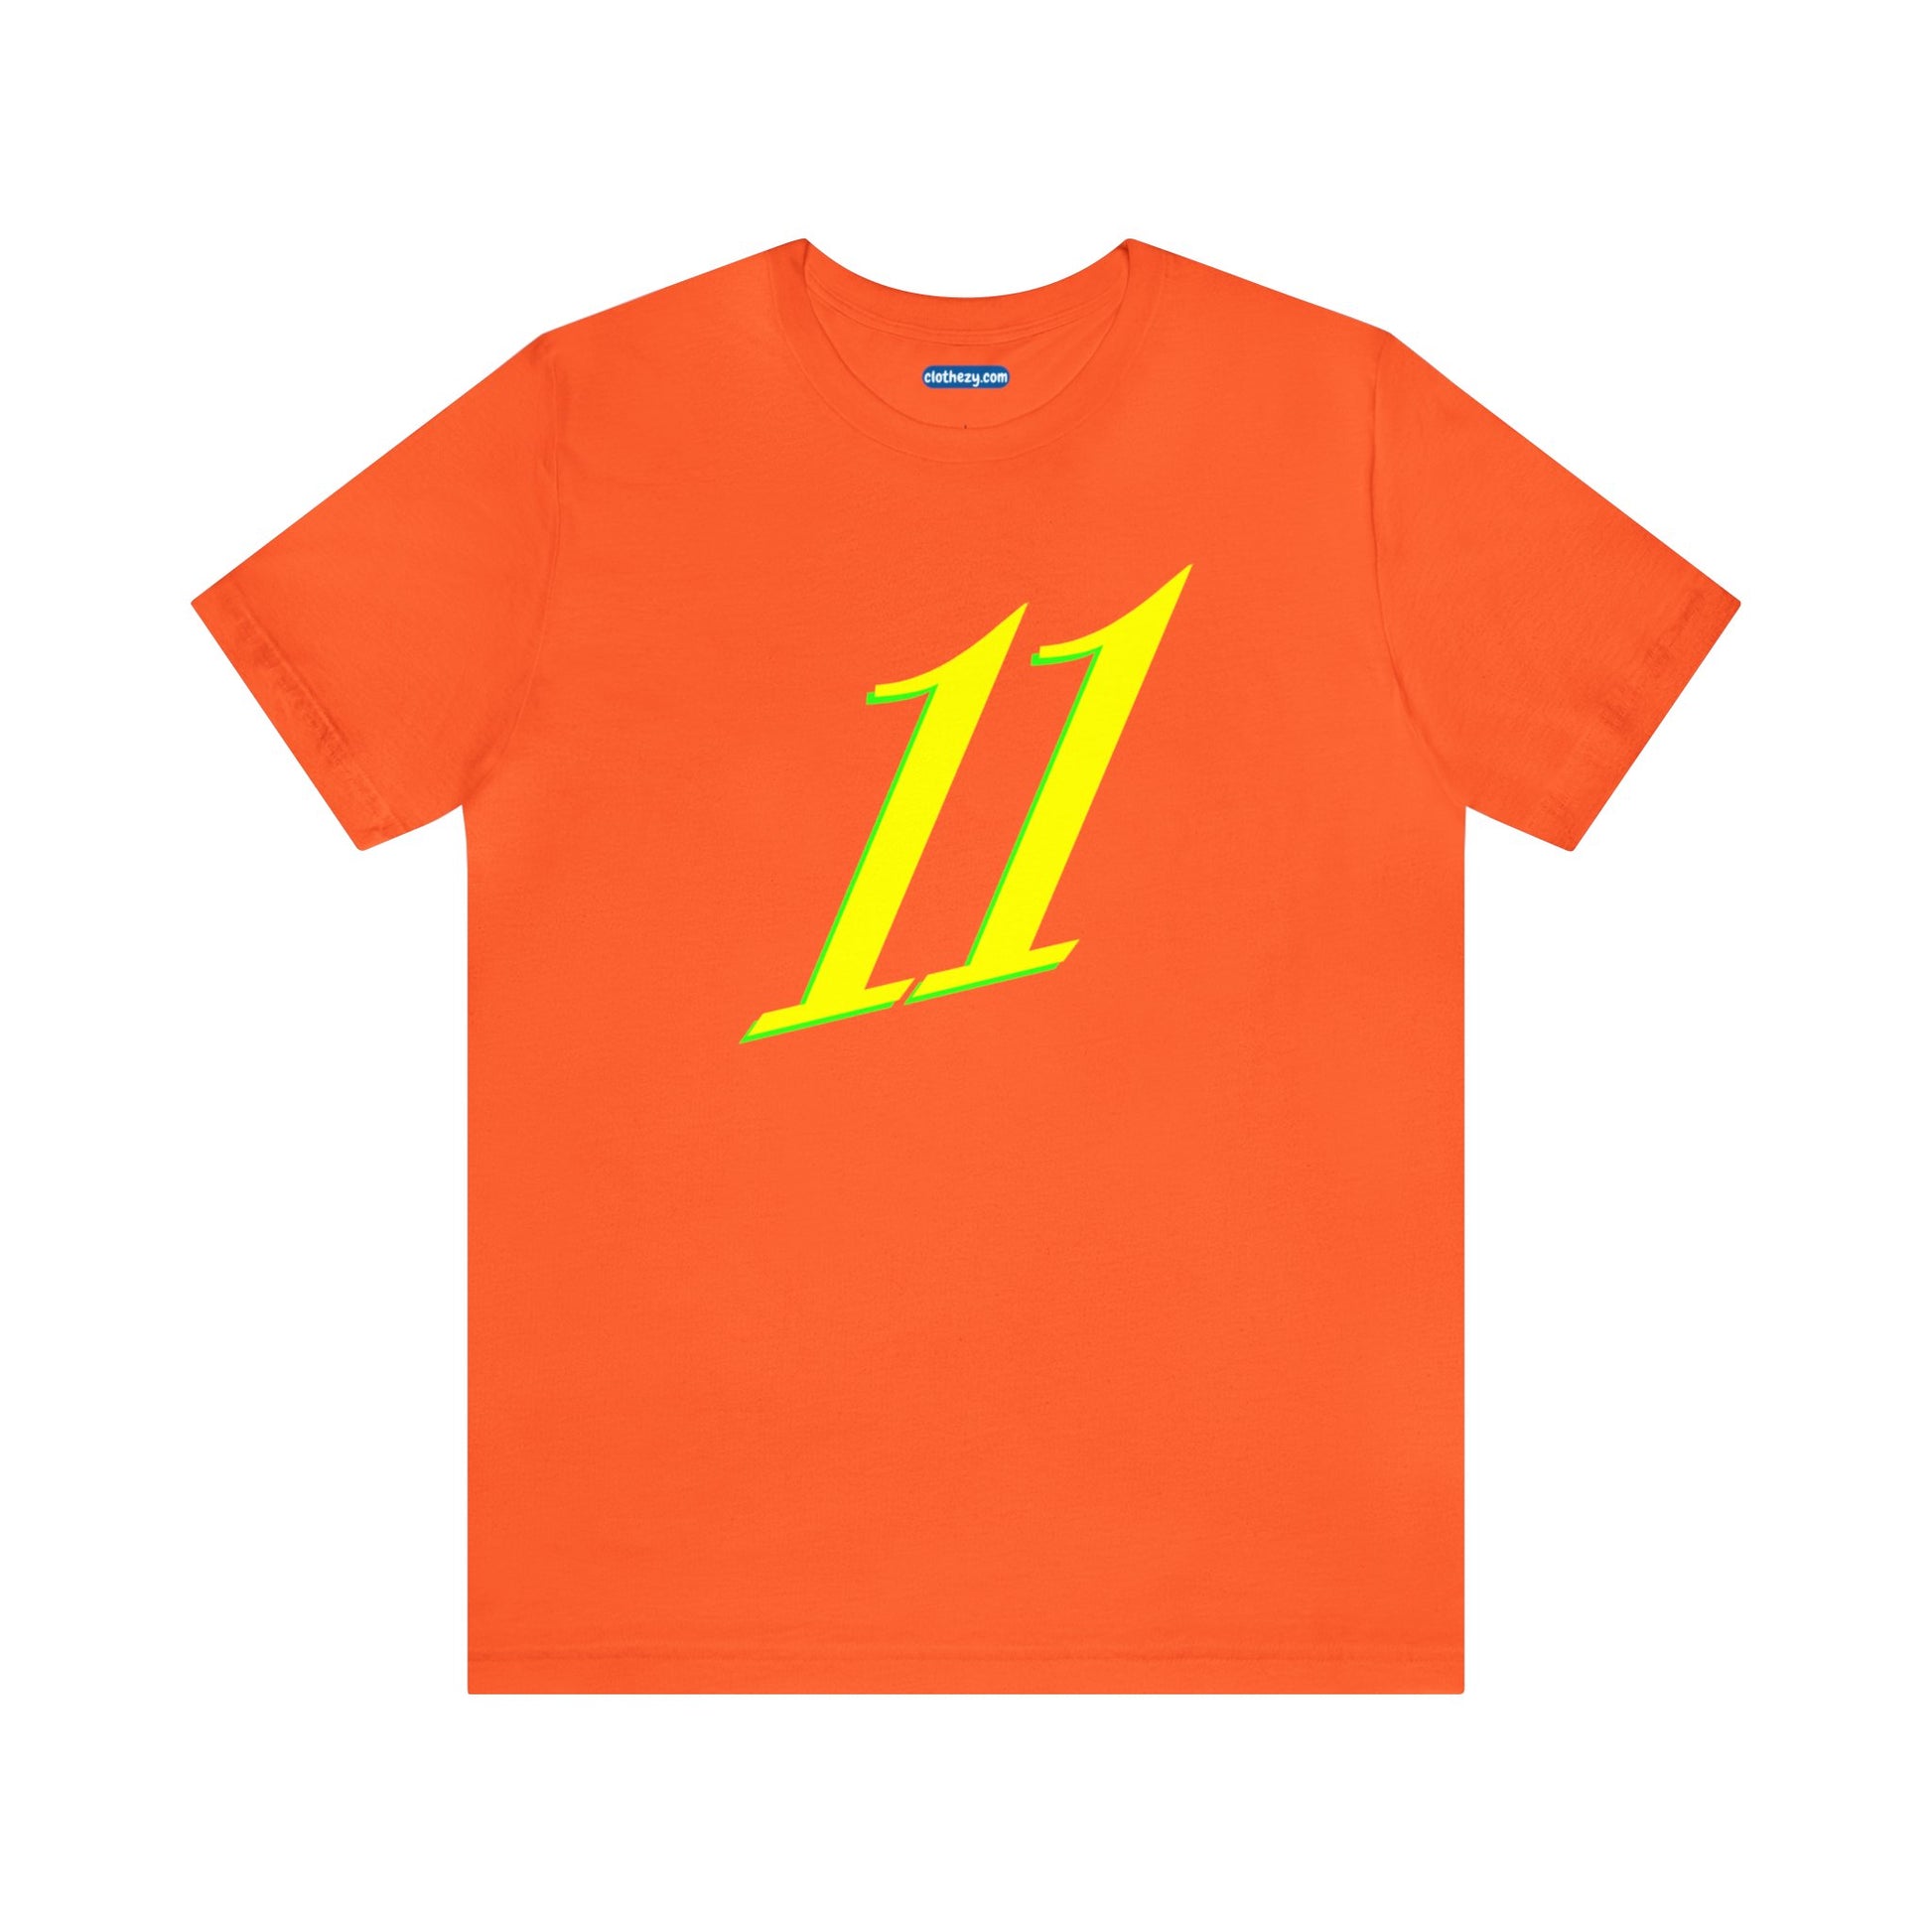 Number 11 Design - Soft Cotton Tee for birthdays and celebrations, Gift for friends and family, Multiple Options by clothezy.com in Orange Size Small - Buy Now